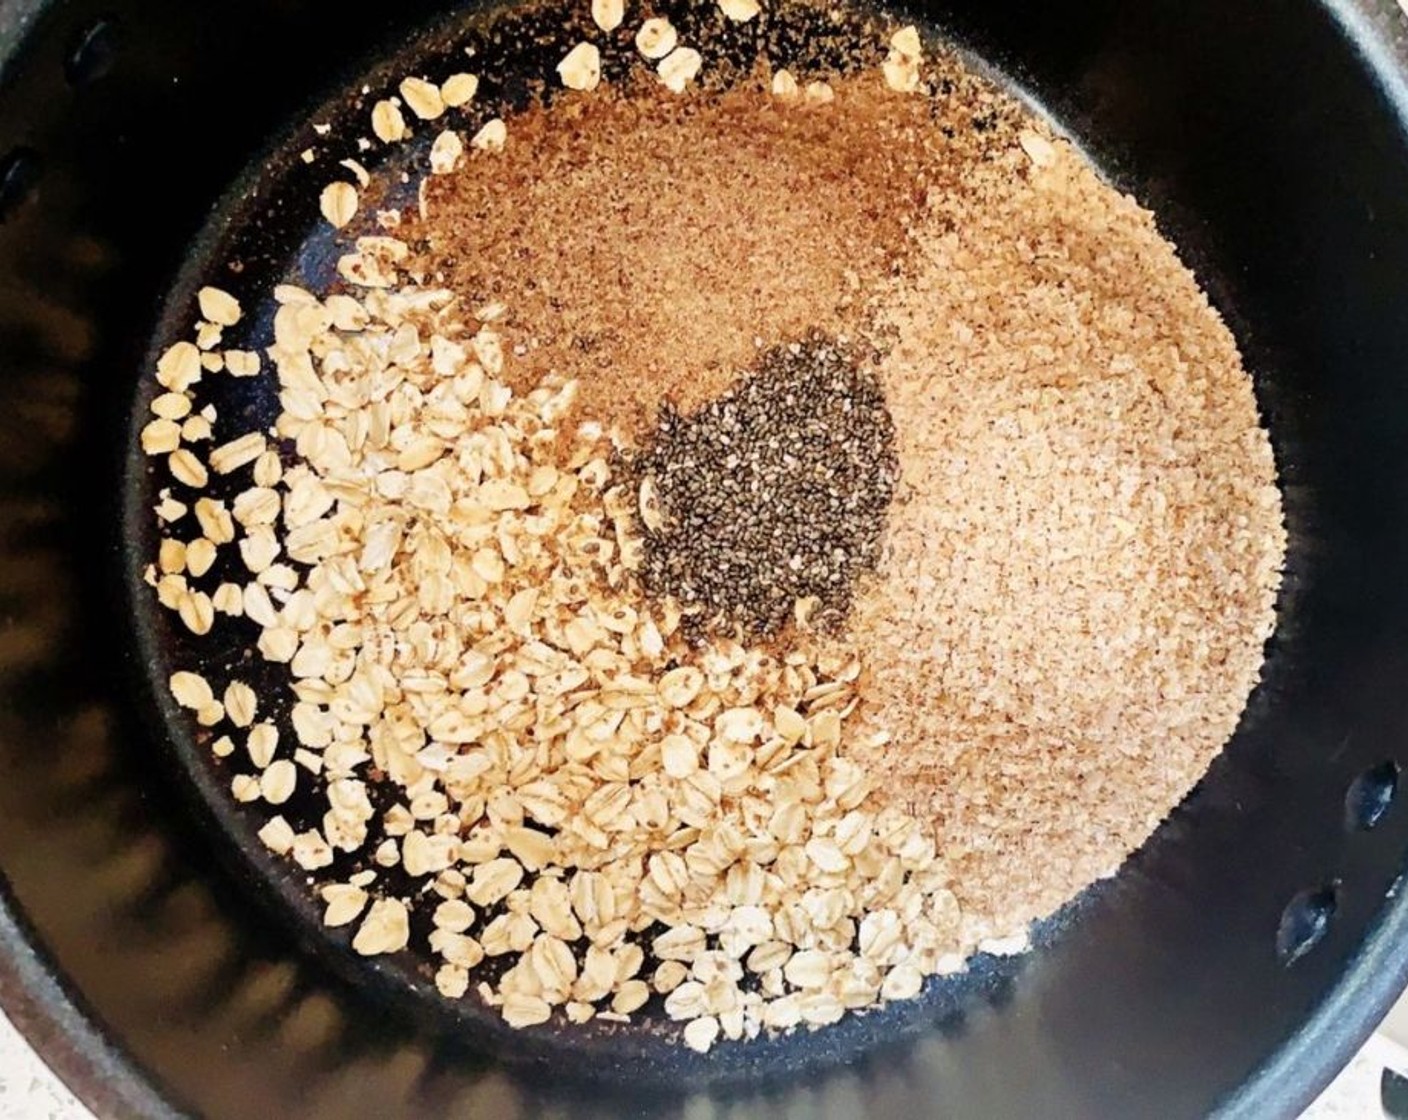 step 1 In a saucepan, place the Old Fashioned Rolled Oats (1/2 cup), Wheat Bran (3/4 cup), Ground Flaxseed (2 Tbsp), and Chia Seeds (1 tsp).